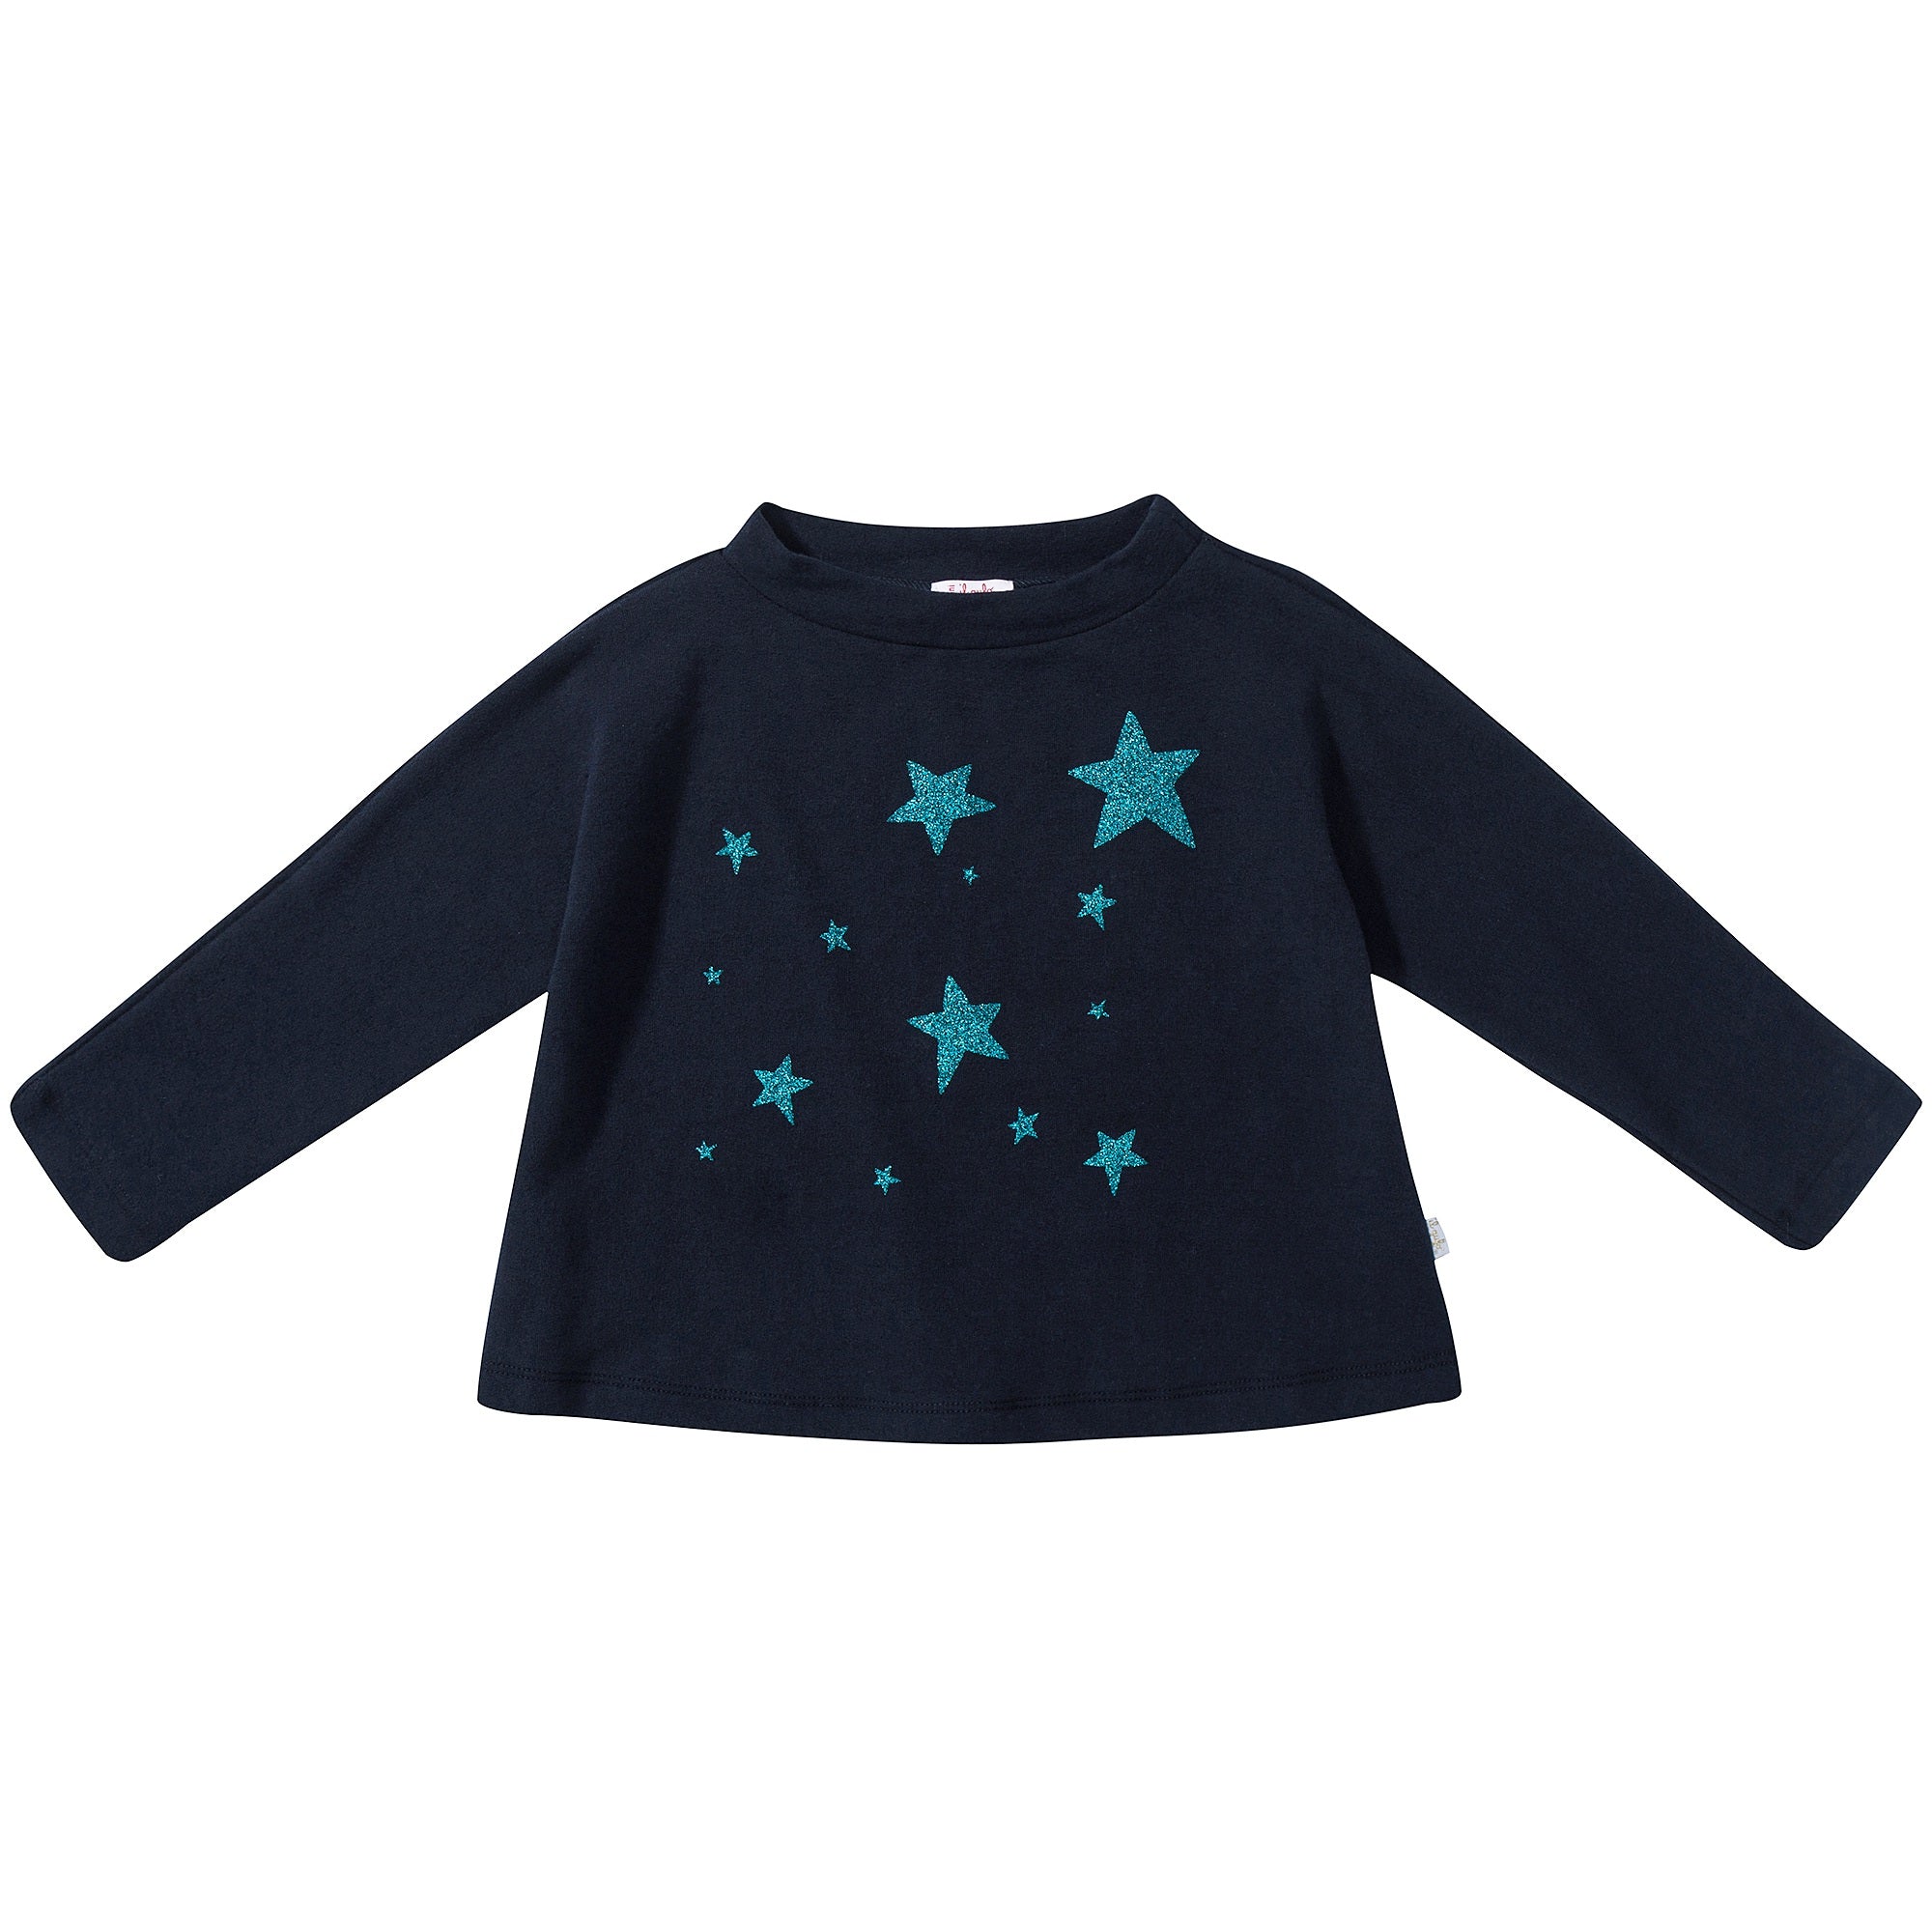 Girls Navy Blue Cotton Two Piece Sets